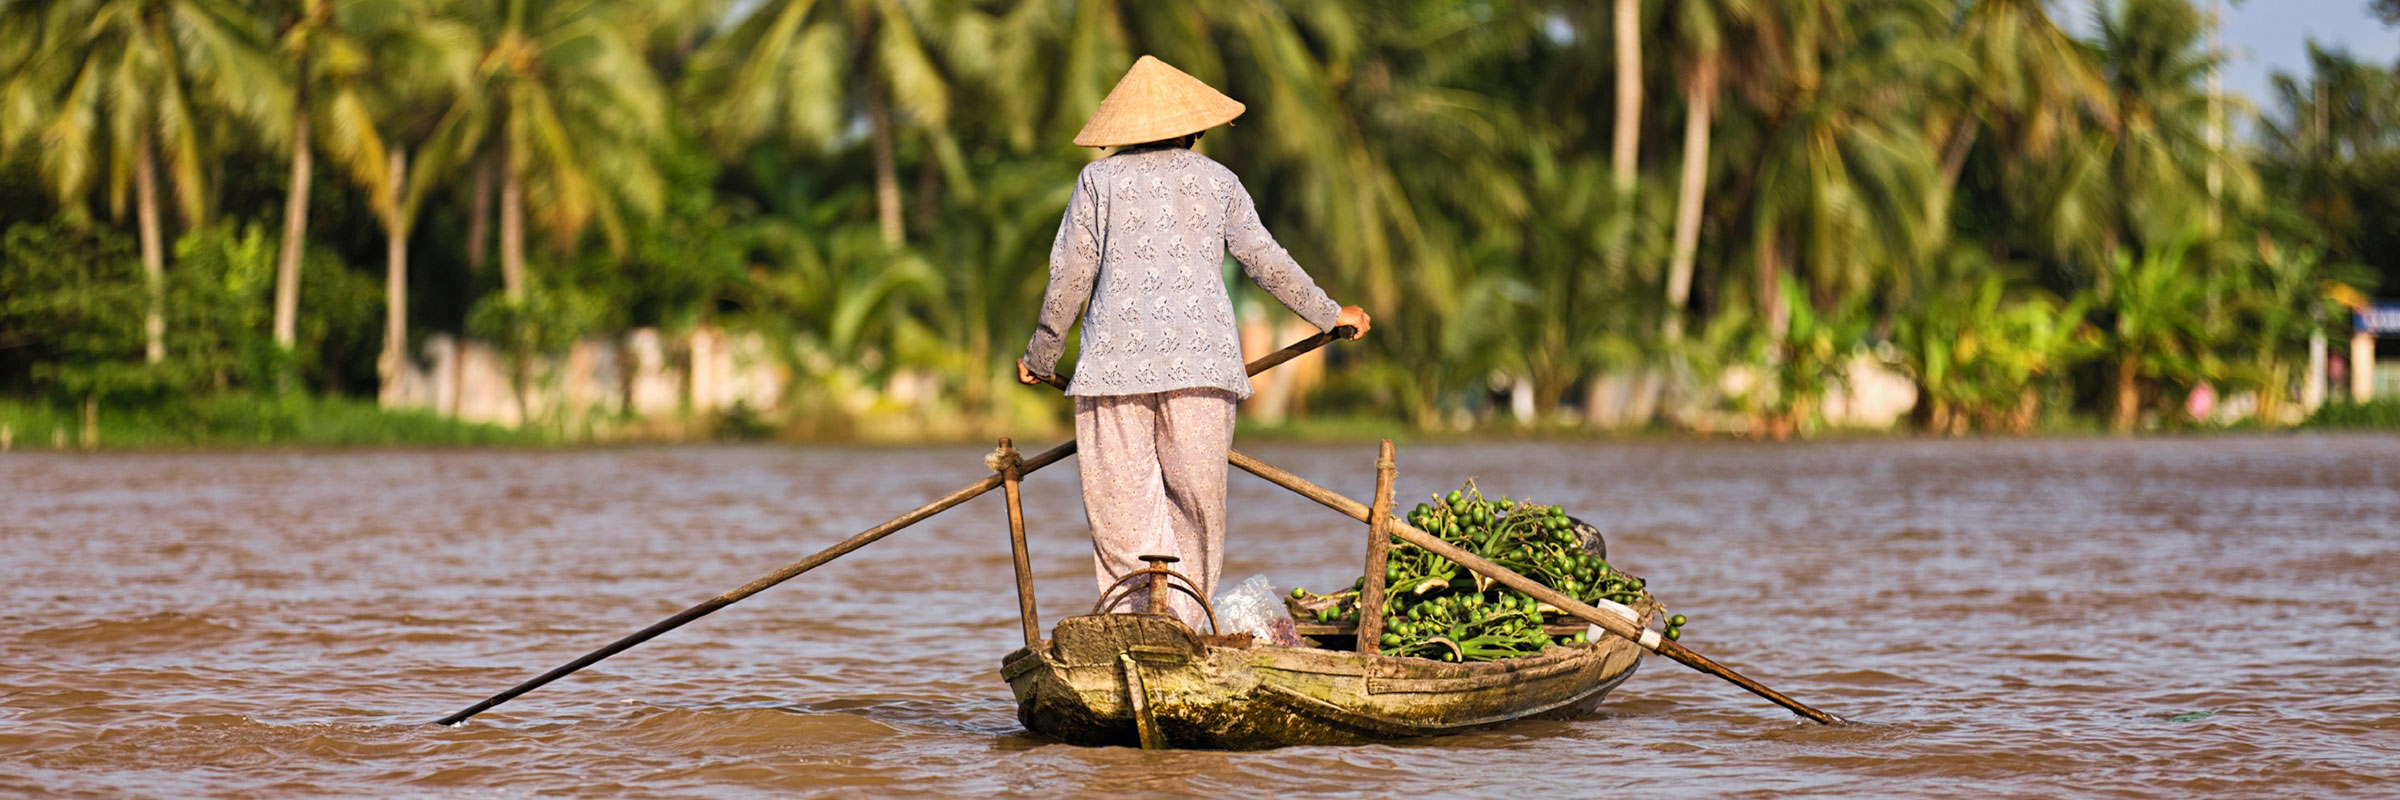 Vietnamese woman rowing a boat in the Mekong River Delta